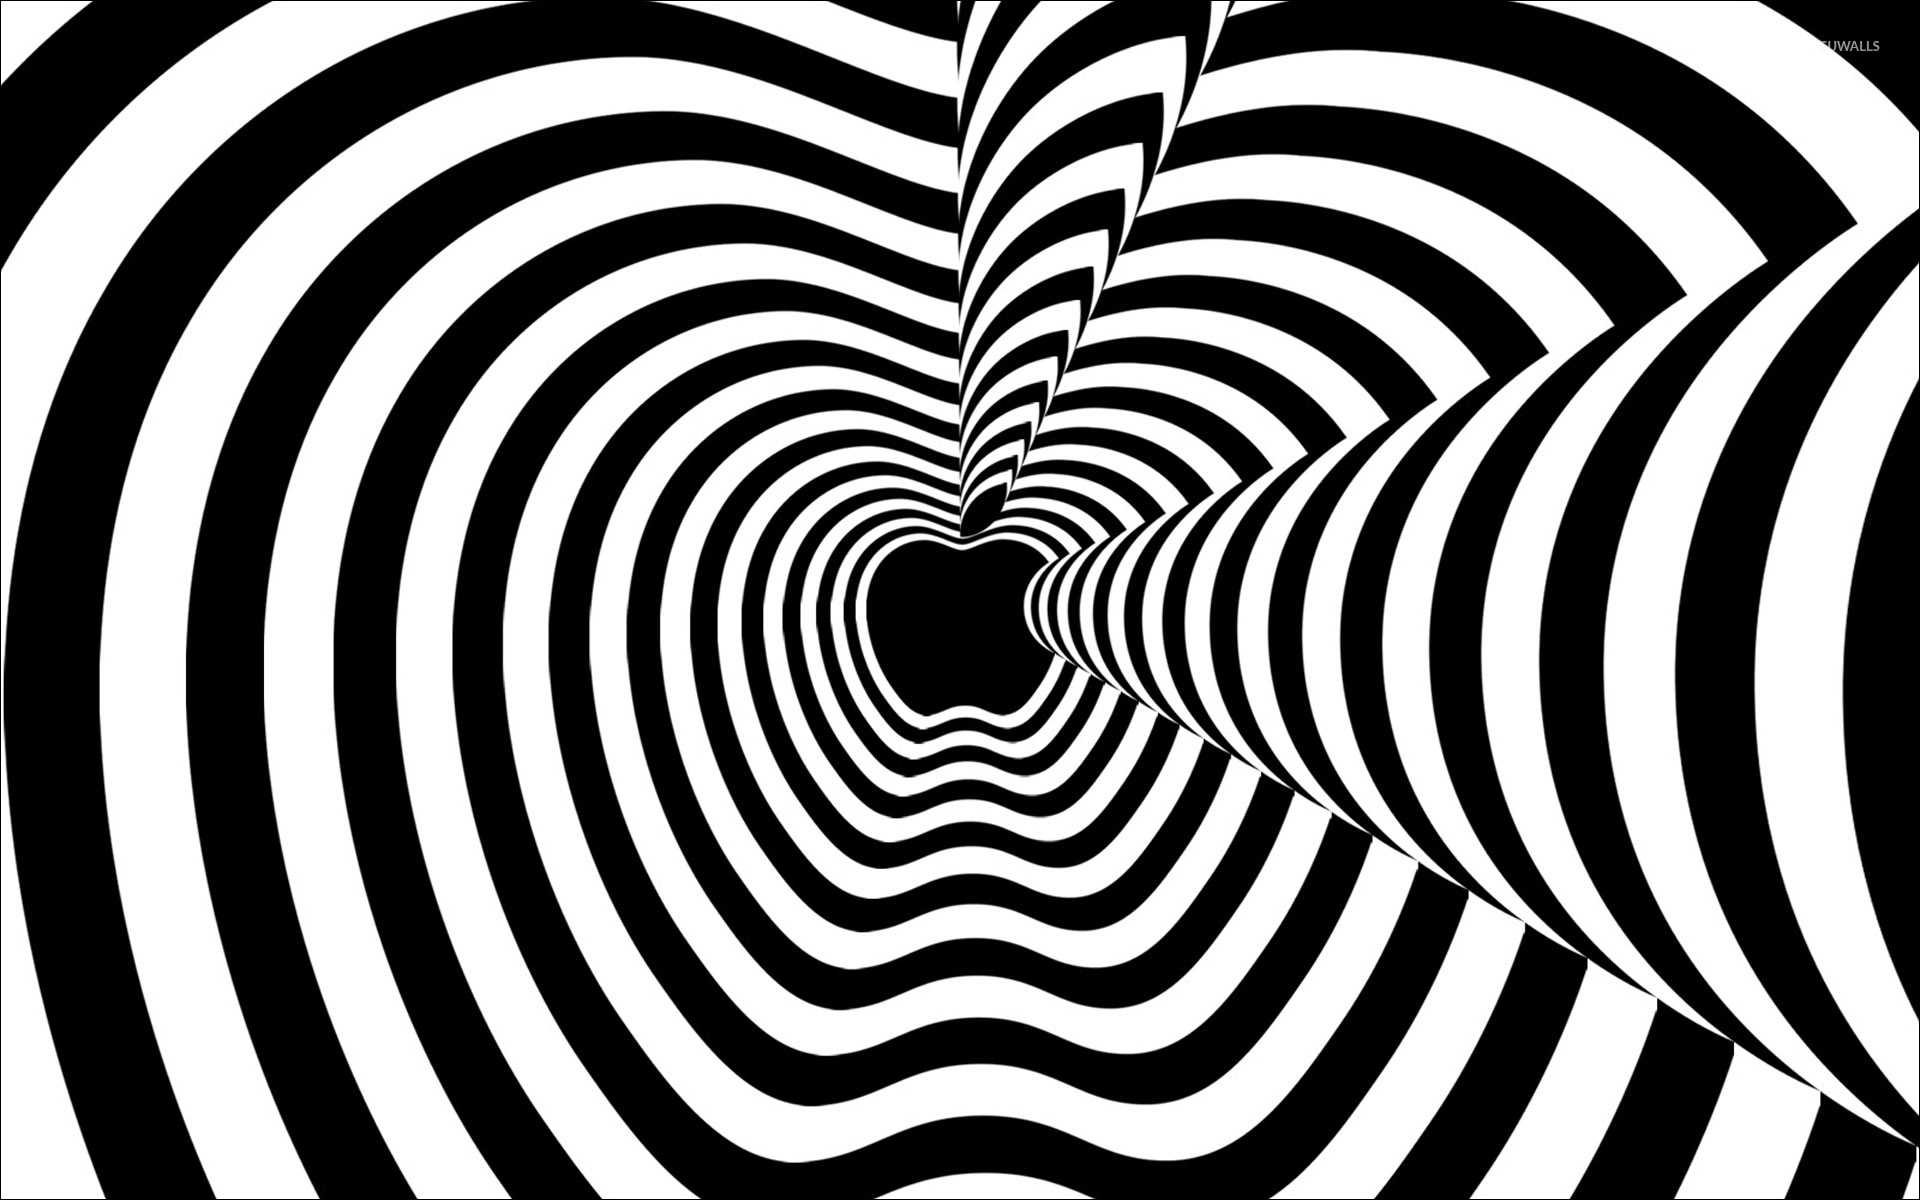 Hypnotic black and white Apple wallpaper - Computer wallpapers - #52741